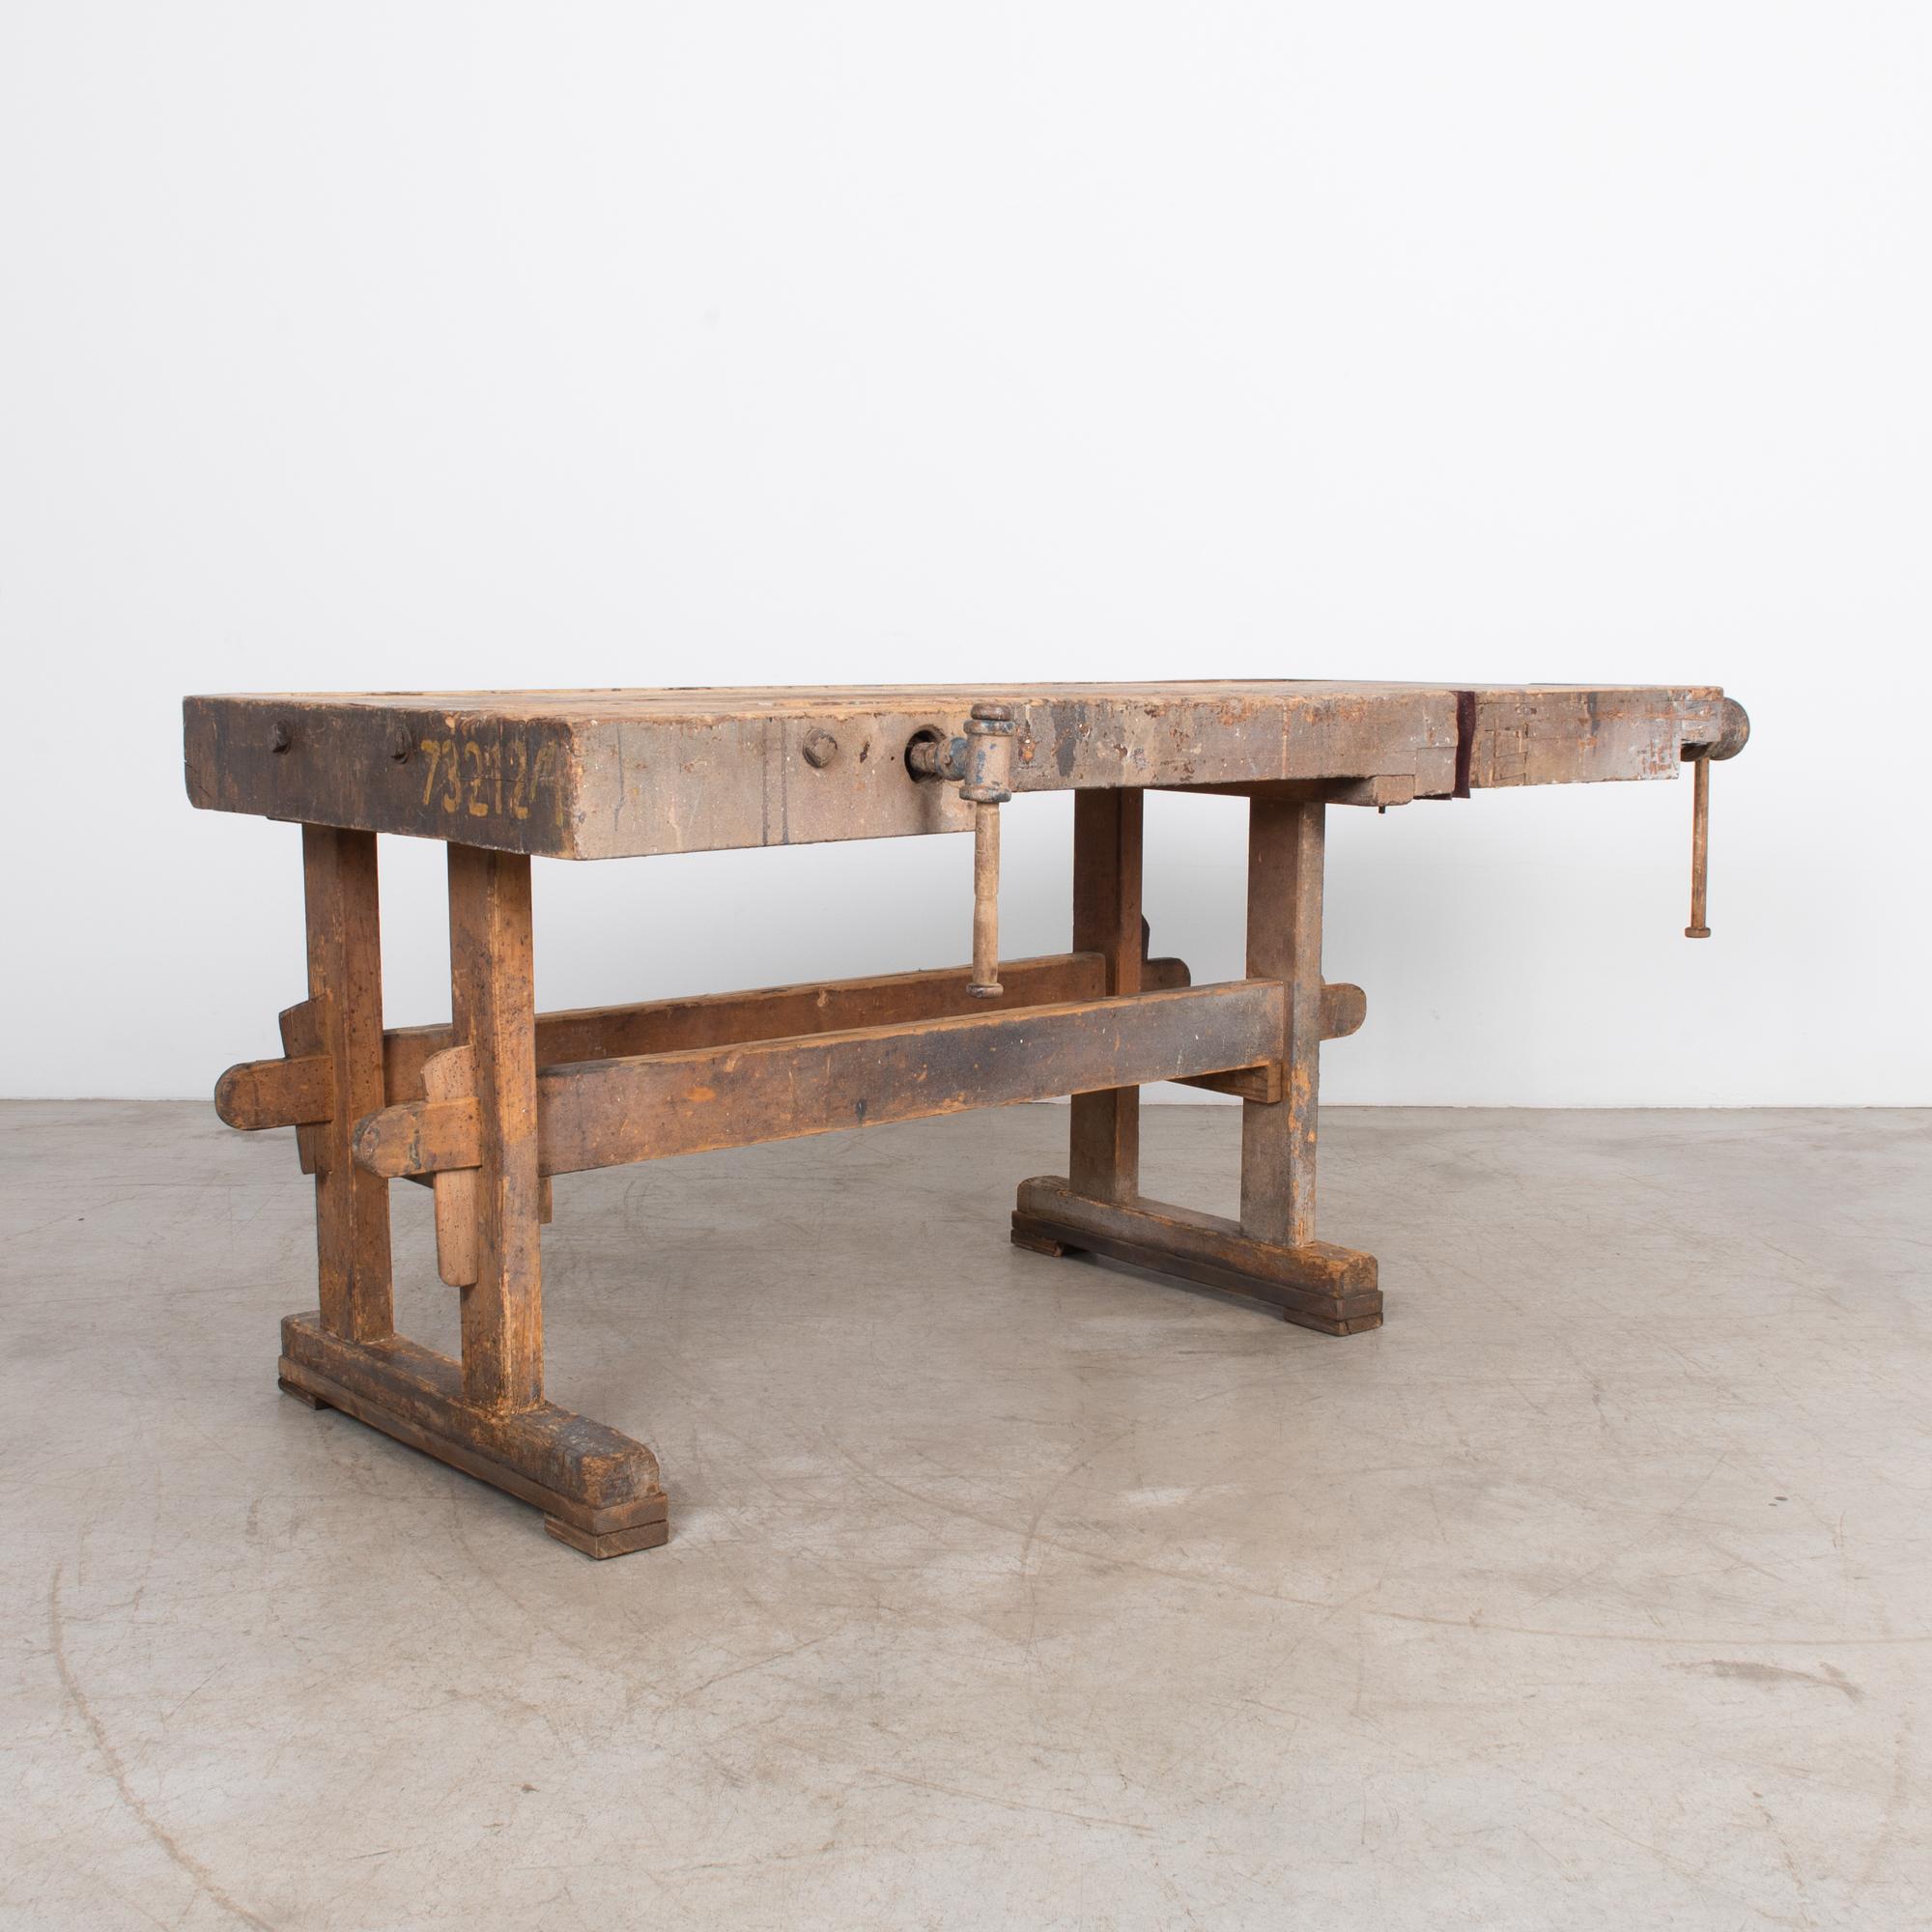 From Czech Republic, this bench is in excellent condition with great rustic details built in the traditional style. This seriously practical table is a heavy duty accent.

Craftsman joinery techniques connect the components, including classic